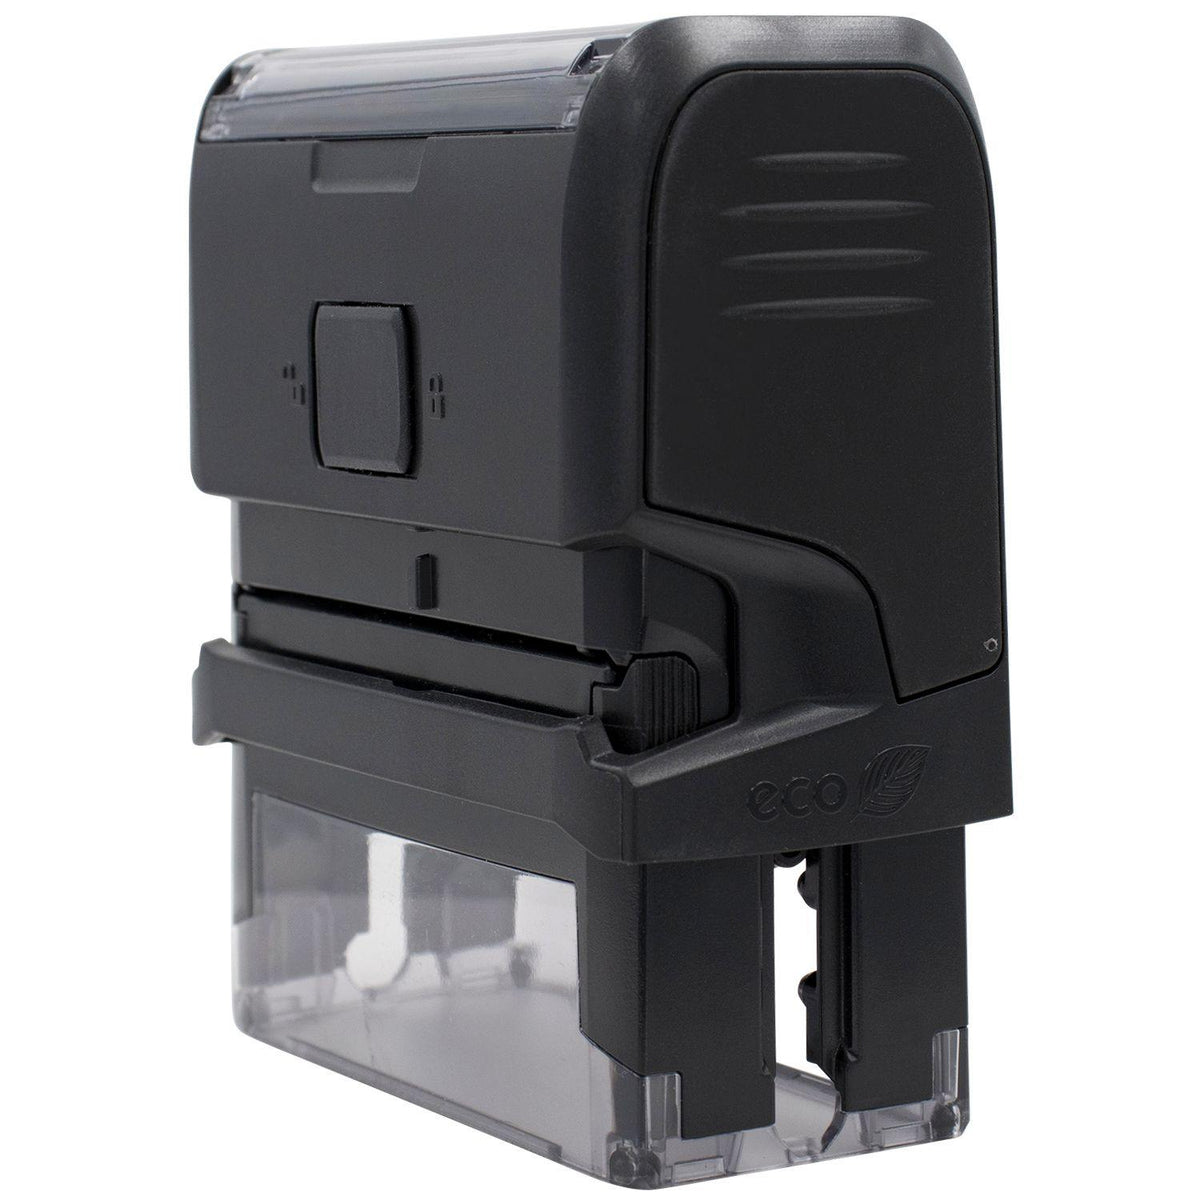 Self Inking Cash Stamp - Engineer Seal Stamps - Brand_Trodat, Impression Size_Small, Stamp Type_Self-Inking Stamp, Type of Use_Business, Type of Use_Finance